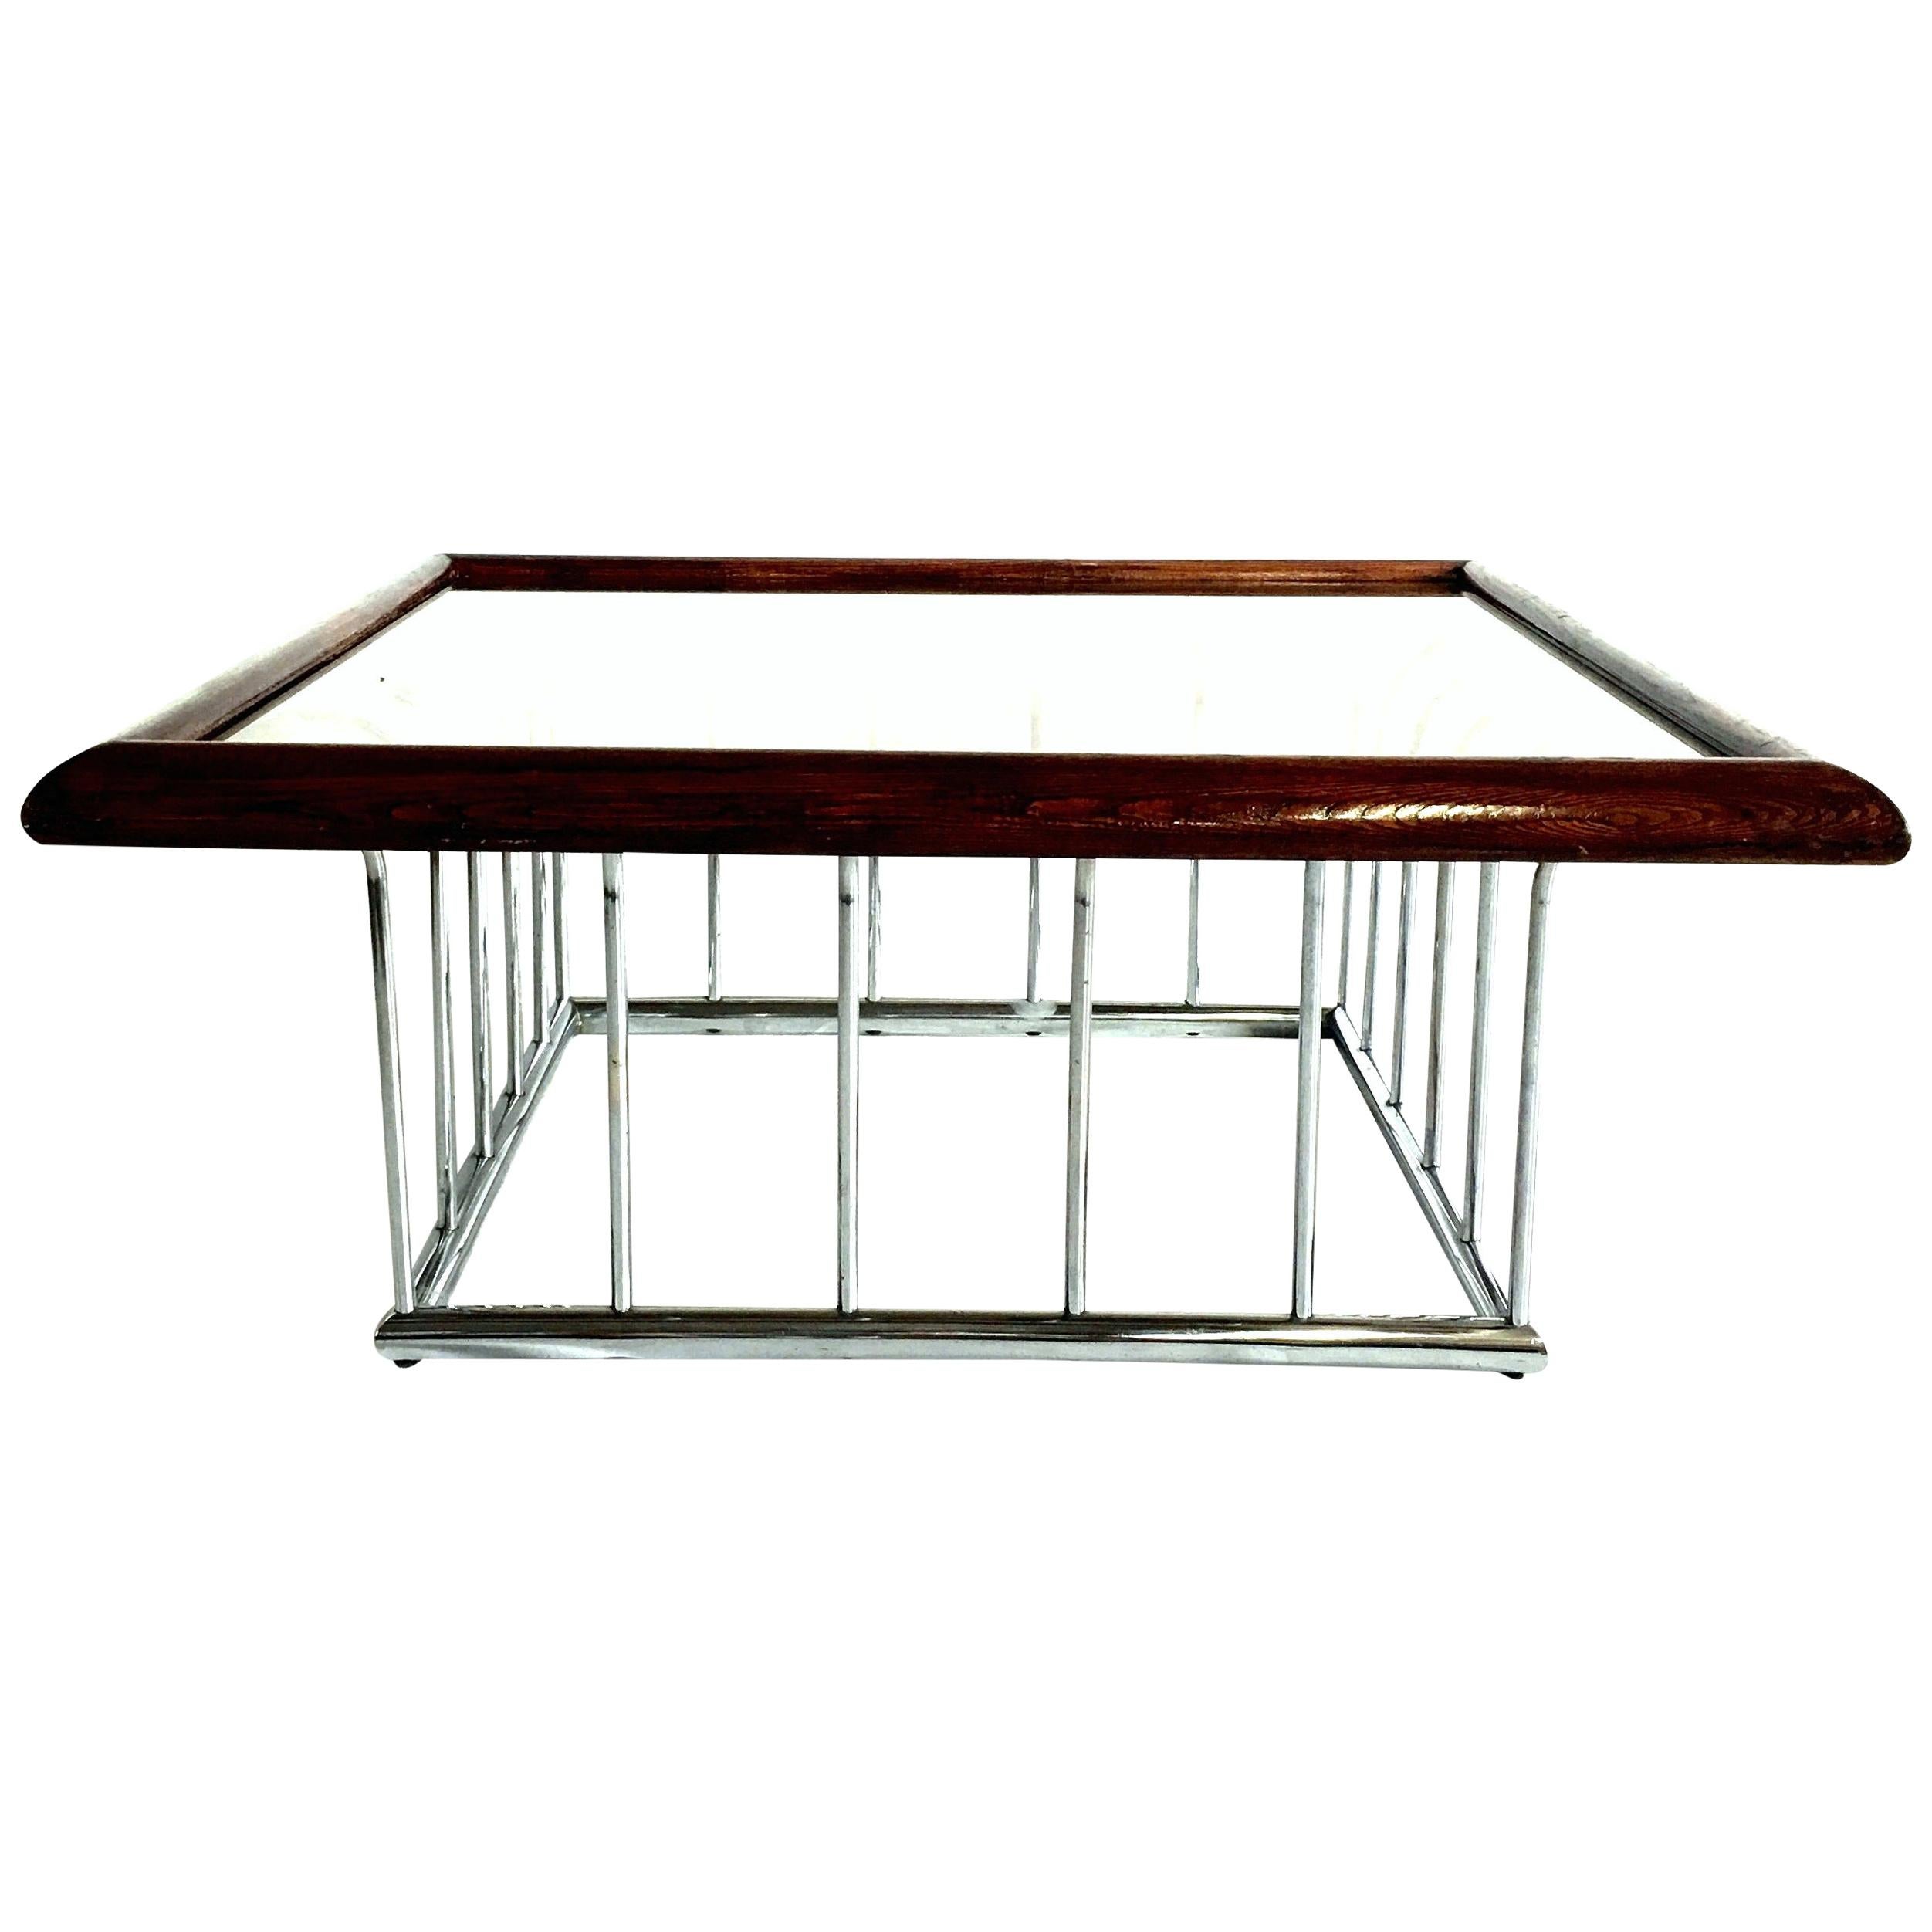 20th Century Milo Baughman Style Wood and Chrome Smoked Glass Top Cocktail Table For Sale